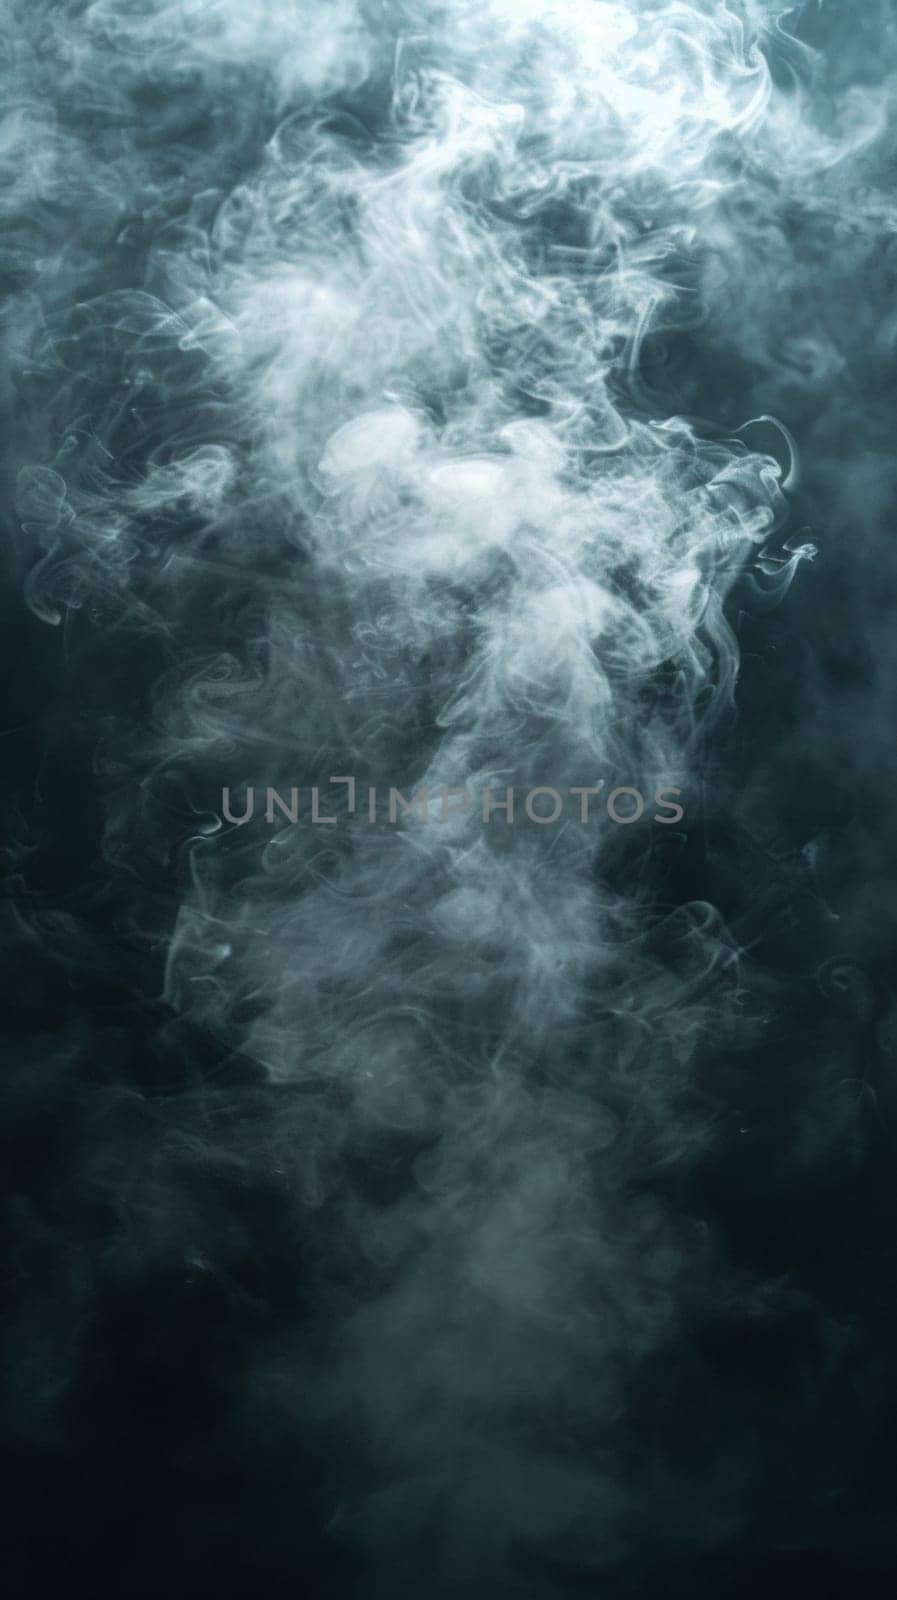 A close up of a smoke cloud in the water, AI by starush